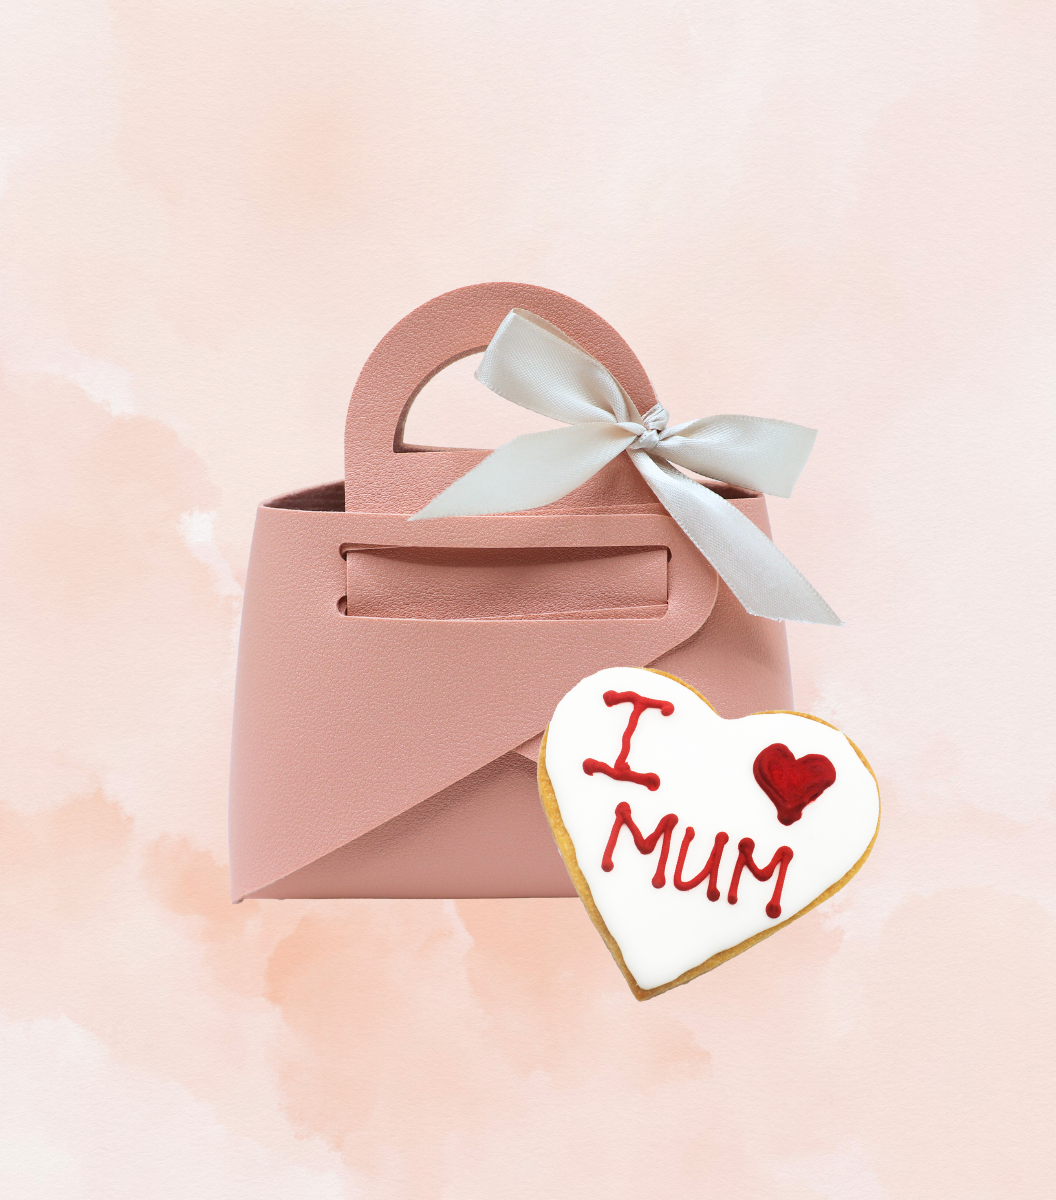 A Gift for Mum